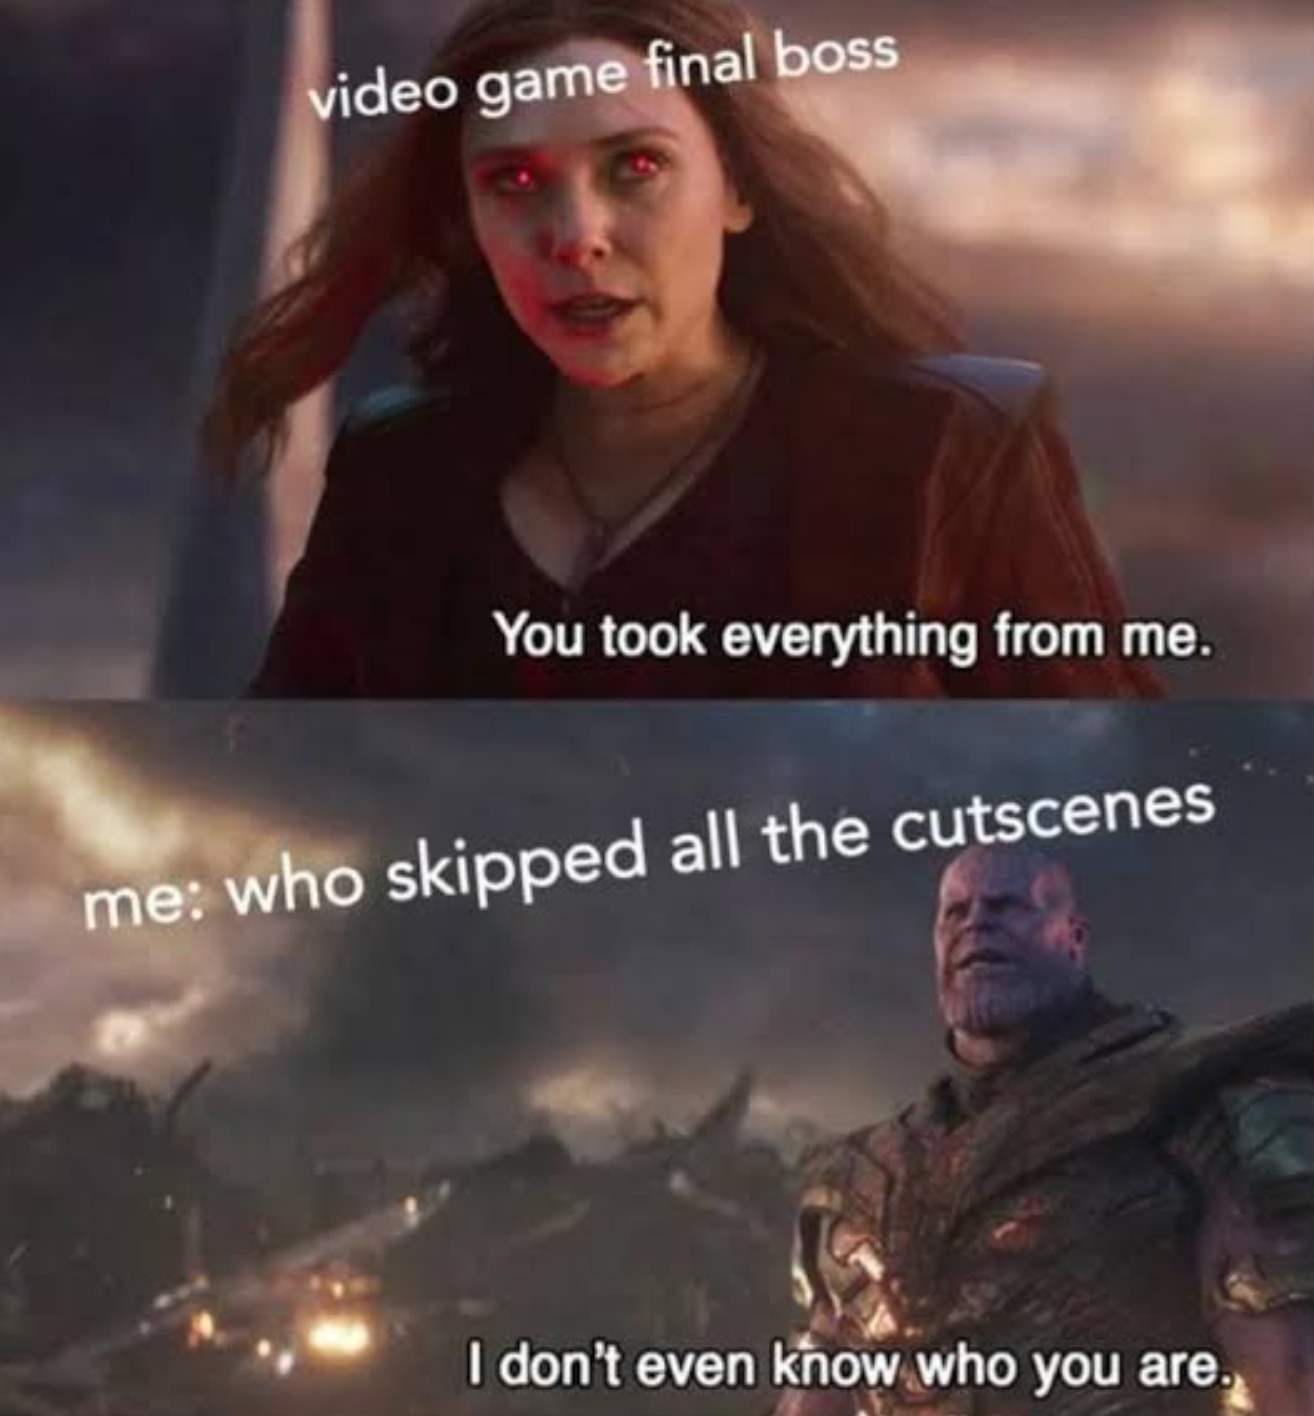 funny gaming memes - dungeons and dragons humor - video game final boss You took everything from me. me who skipped all the cutscenes I don't even know who you are.